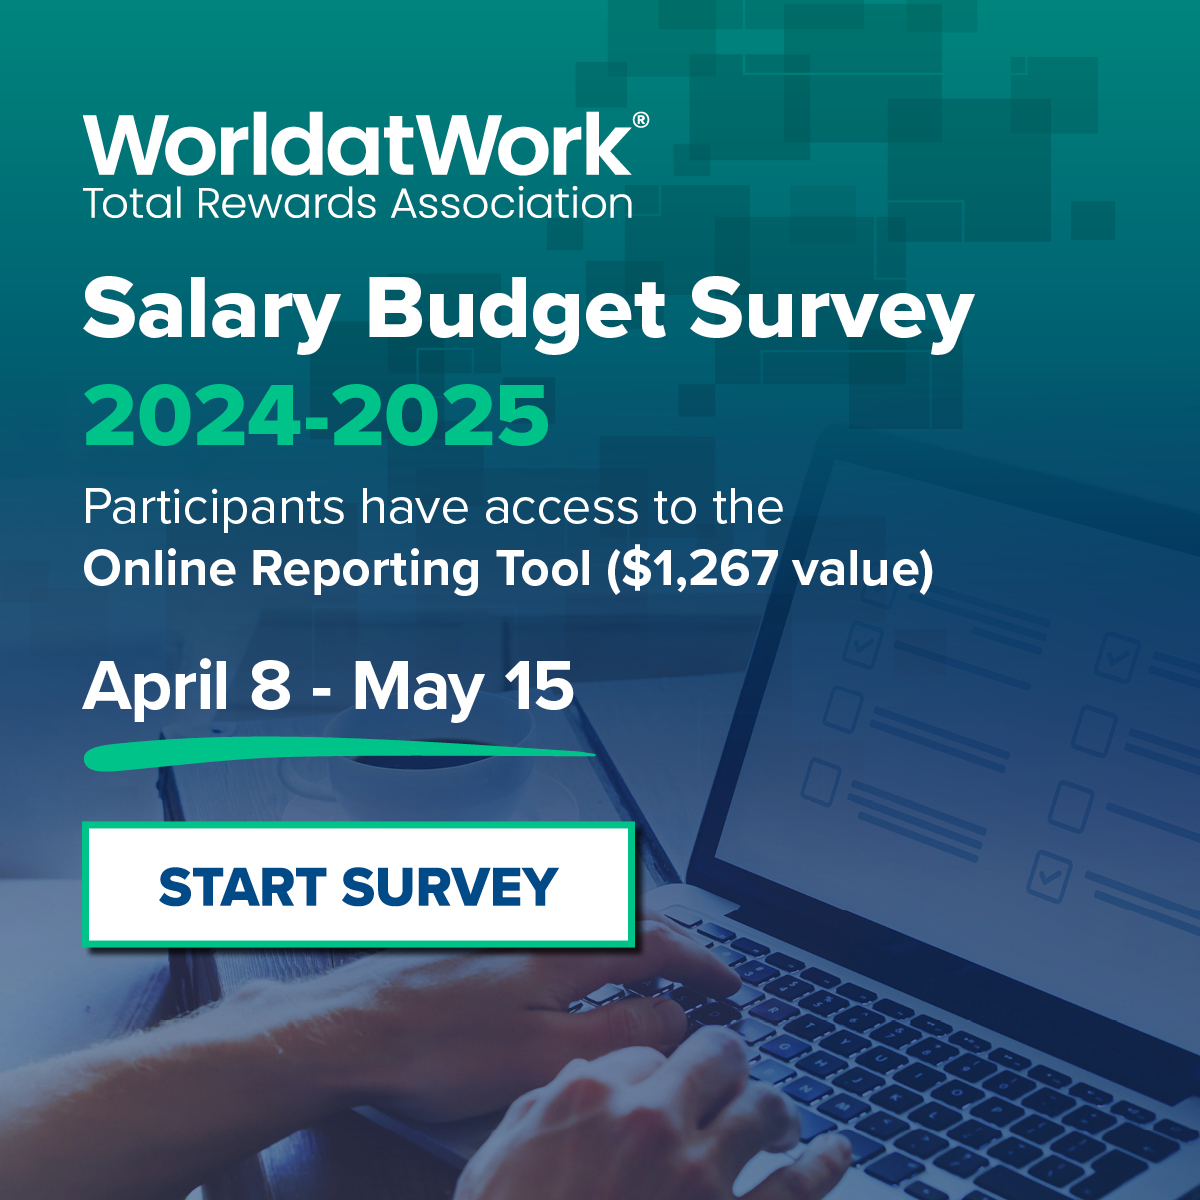 Drive strategic success in #HR! Join @WorldatWork's Salary Budget Survey for FREE insights from 25 countries & save 70% on our Online Reporting Tool. Enhance your salary strategies and gain a competitive edge today! bit.ly/3JHaUqS #CompensationStrategy #HRLeadership